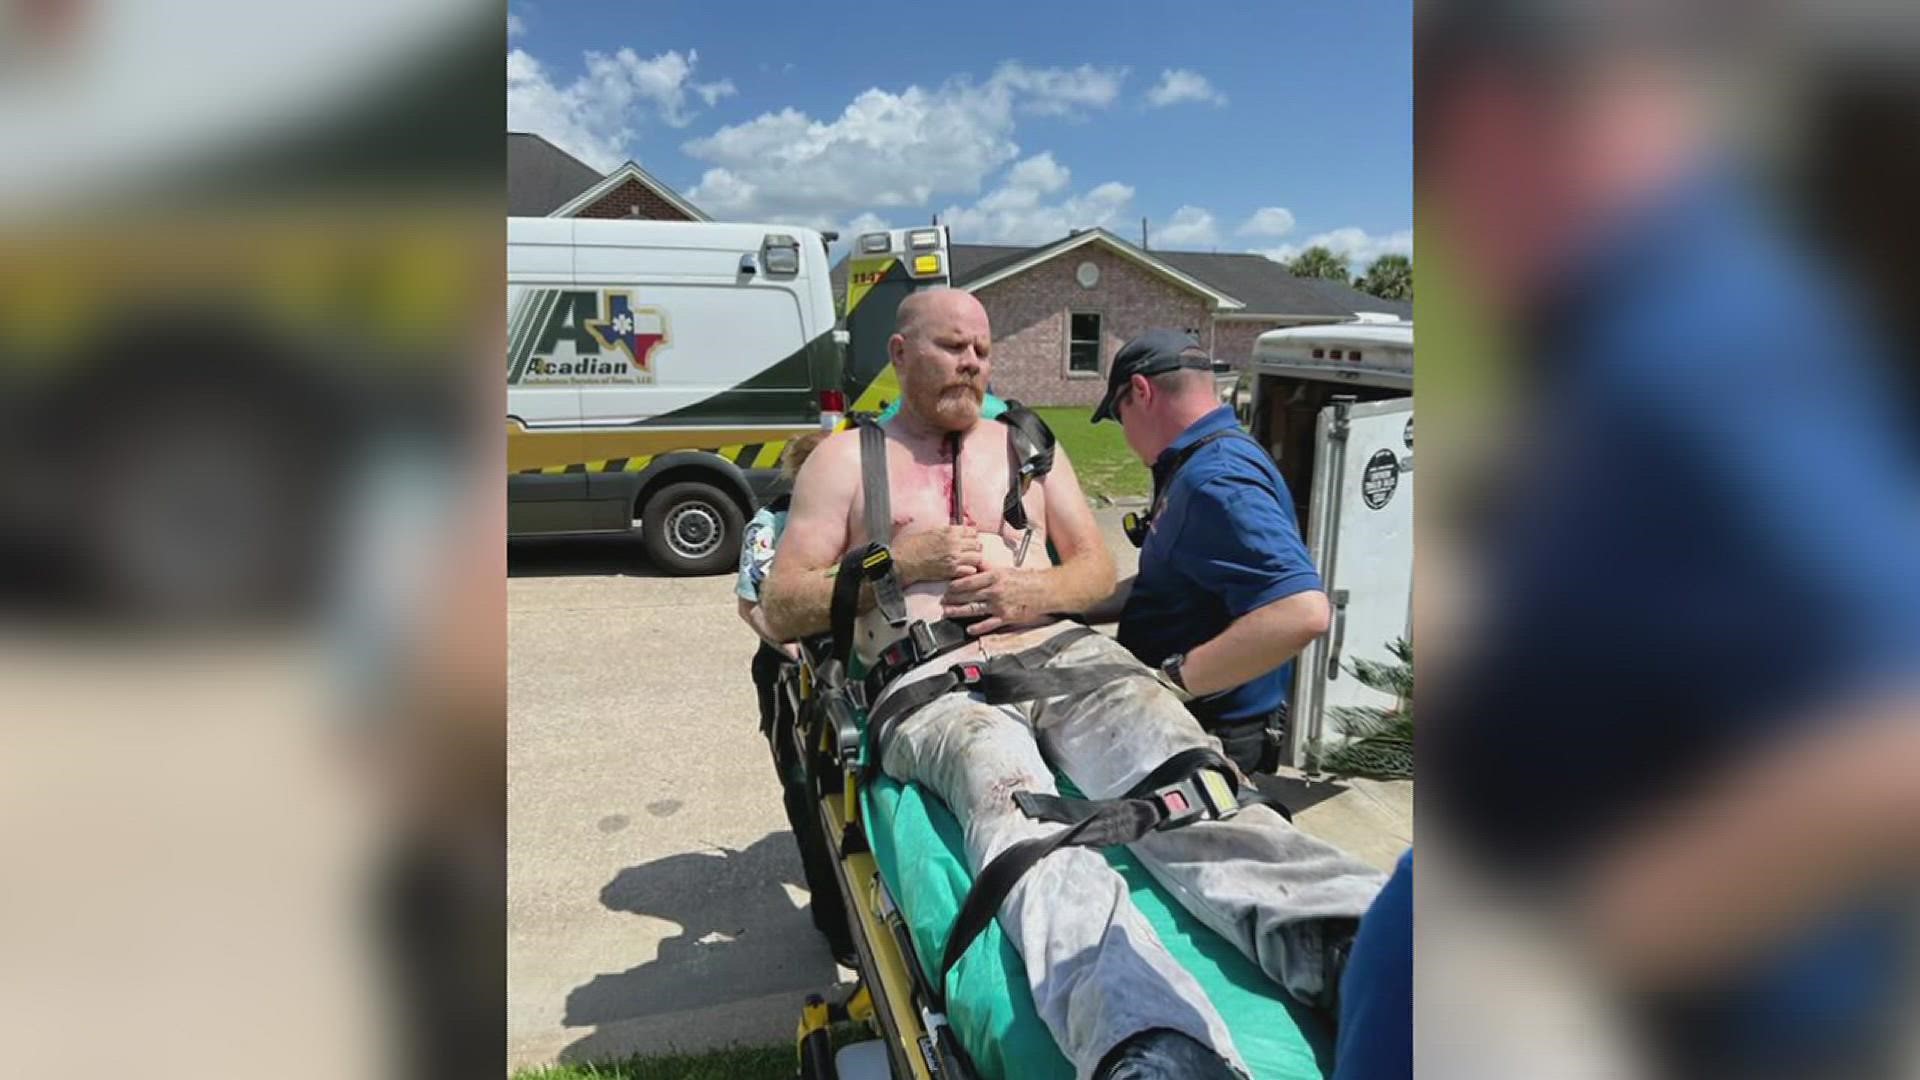 Doctors believe a Nederland man is lucky to be alive after a freak accident turned into a near death experience.